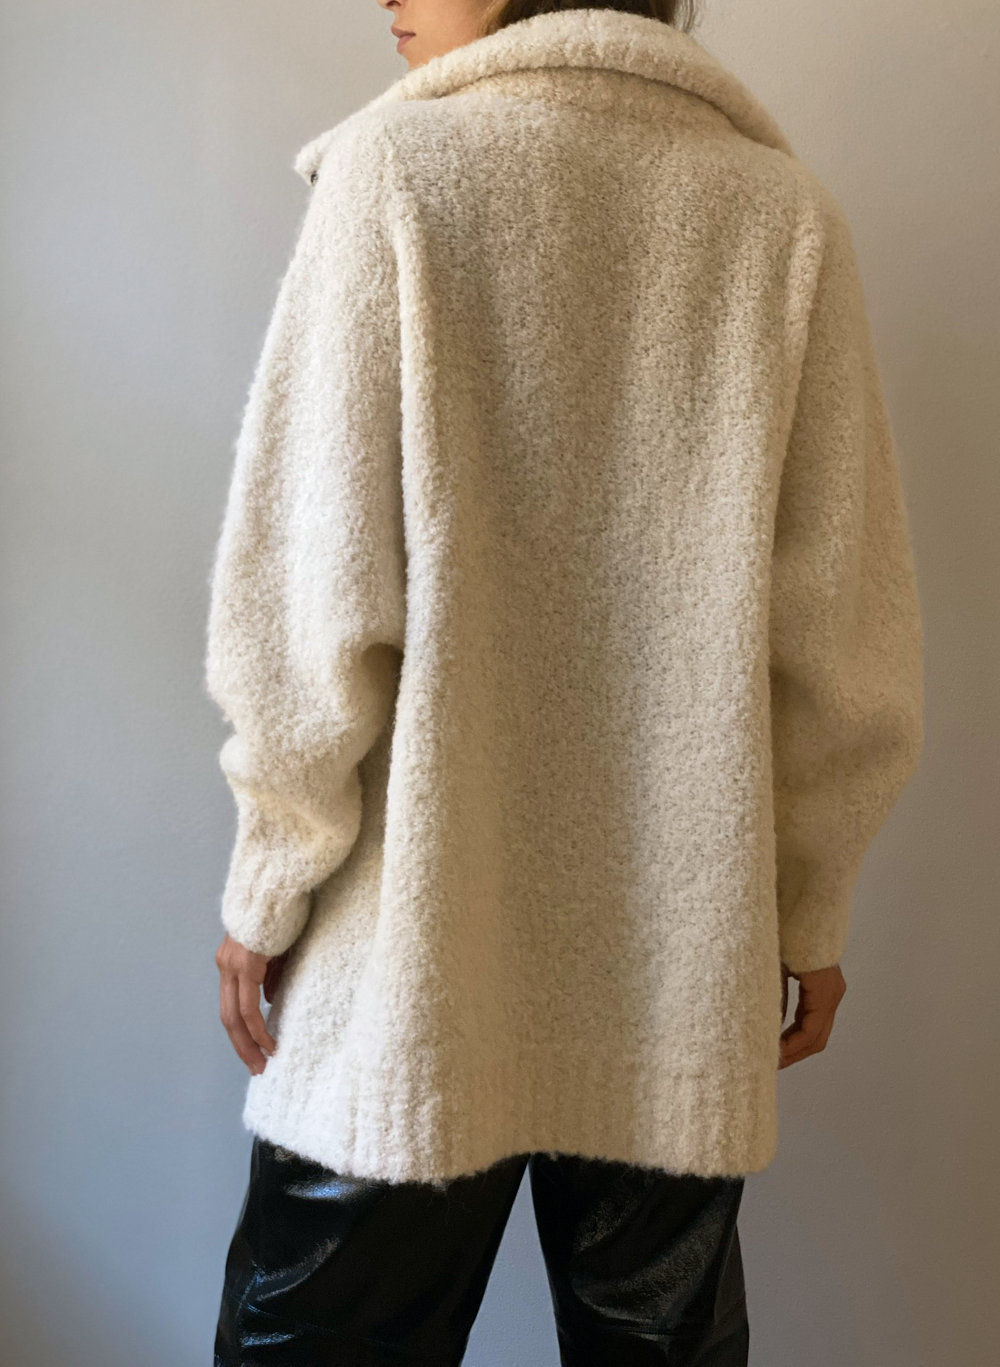 Oversized relaxed wool alpaca cardigan in brown